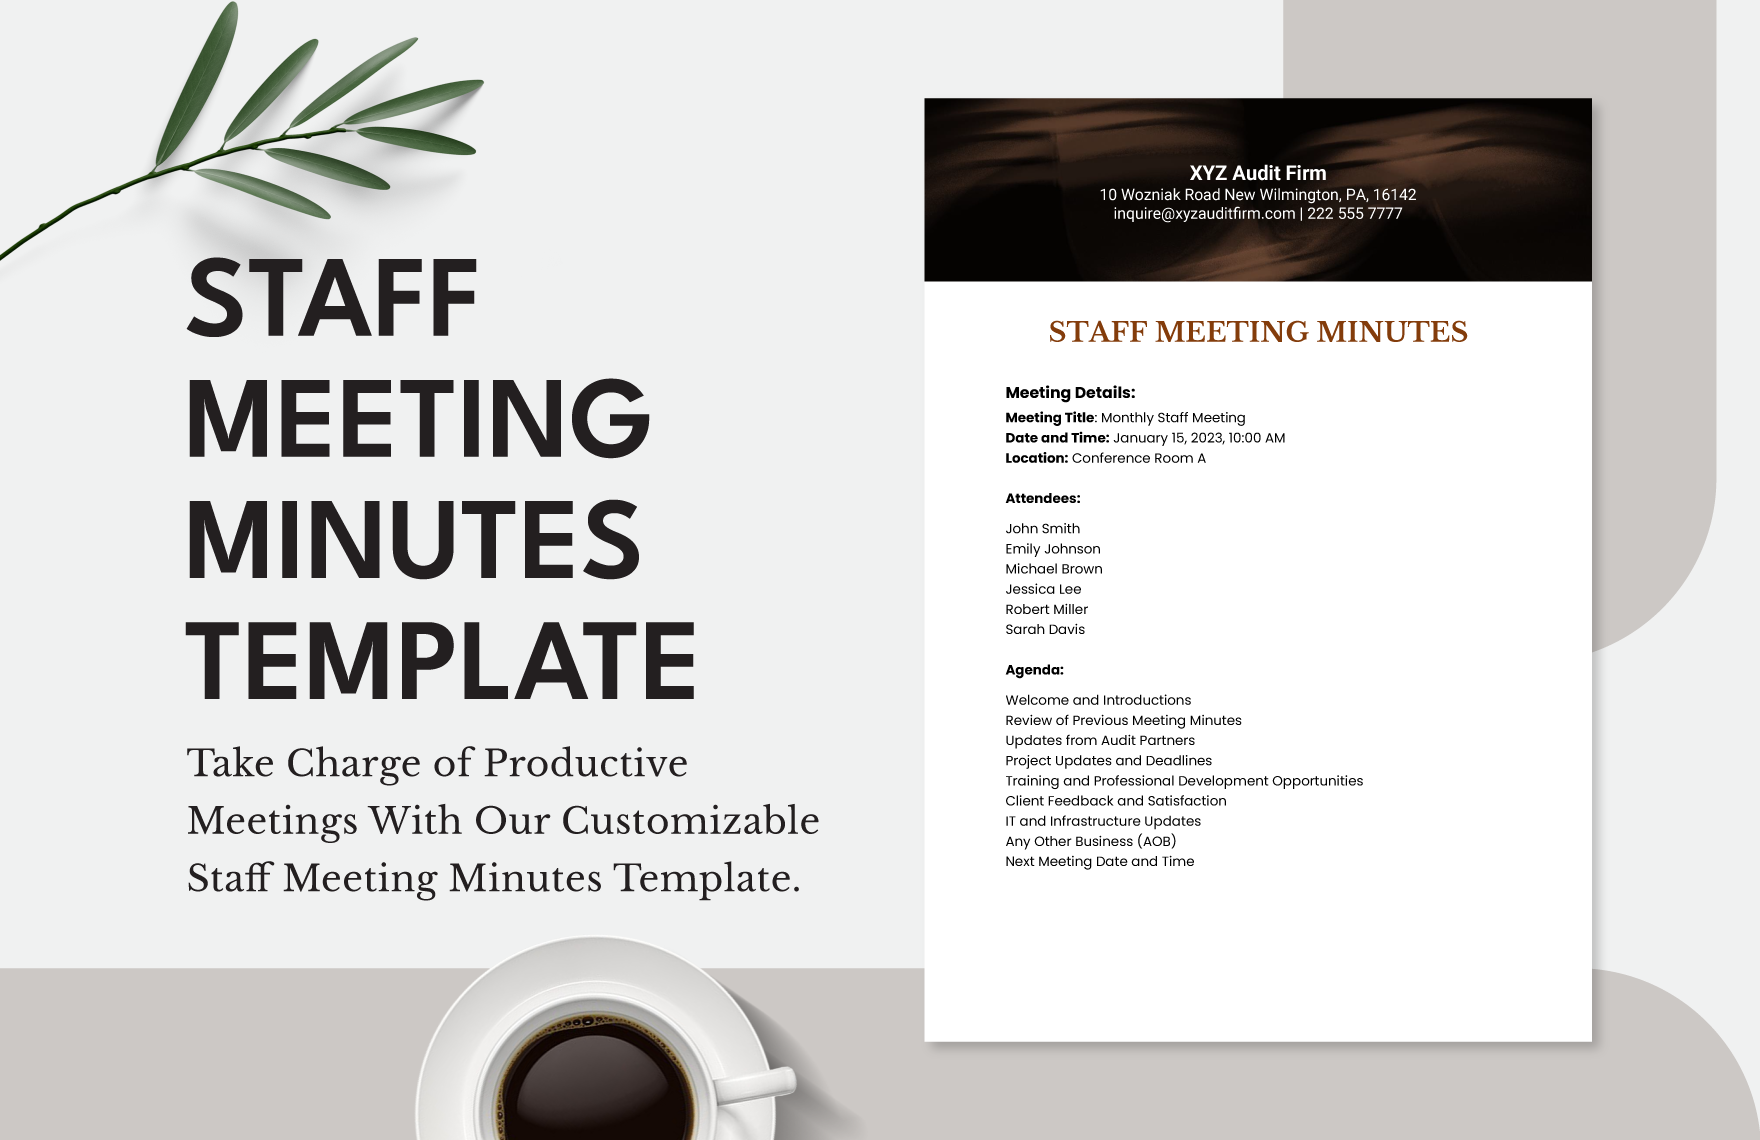 Staff Meeting Minutes Template in Word, Google Docs, PDF, Apple Pages